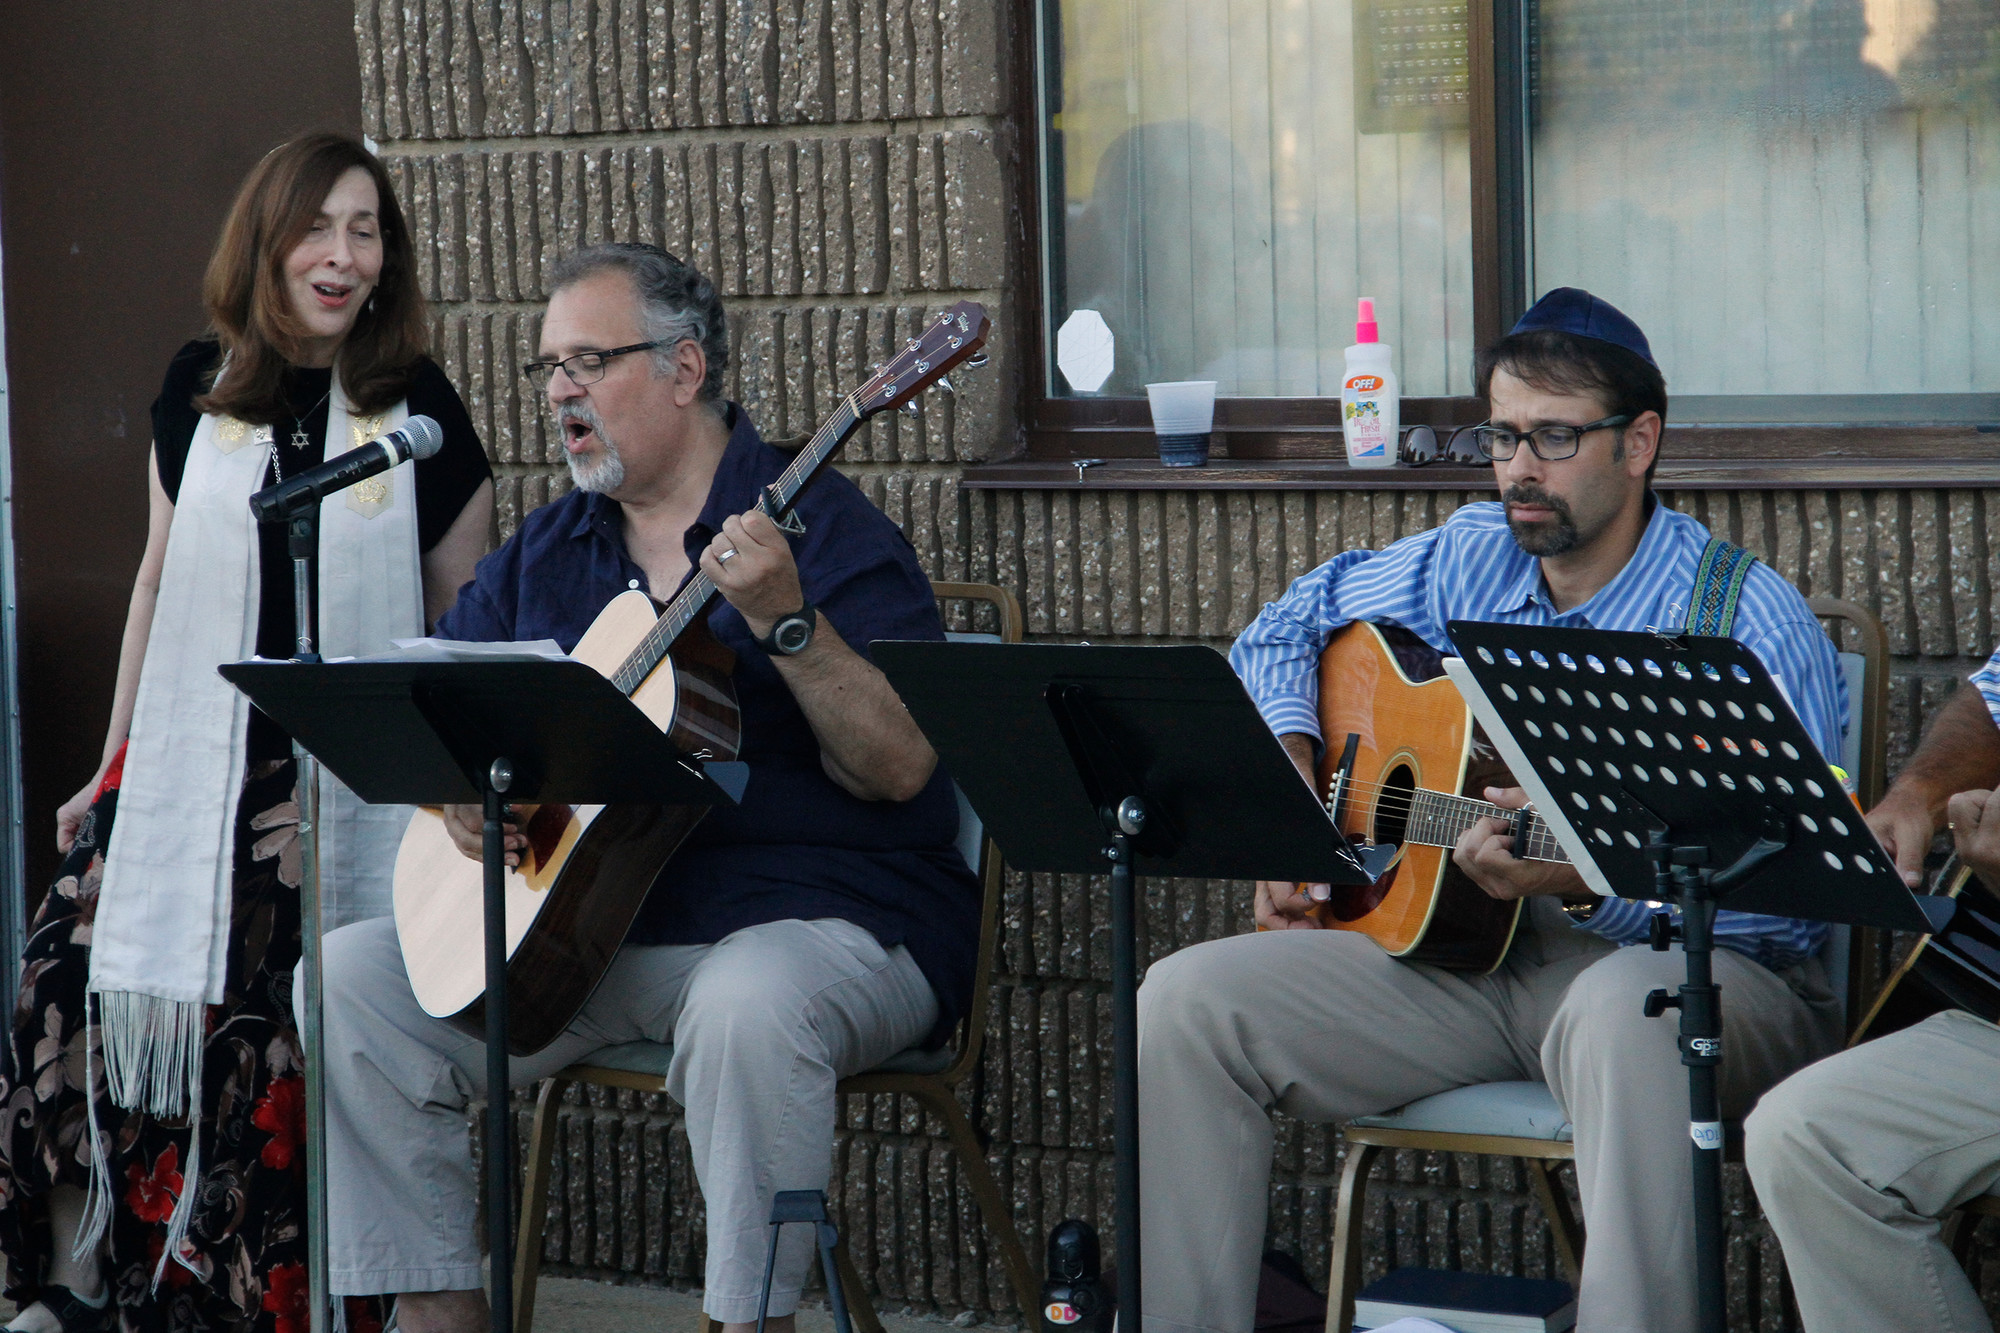 The Special Occasion band entertained congregants.